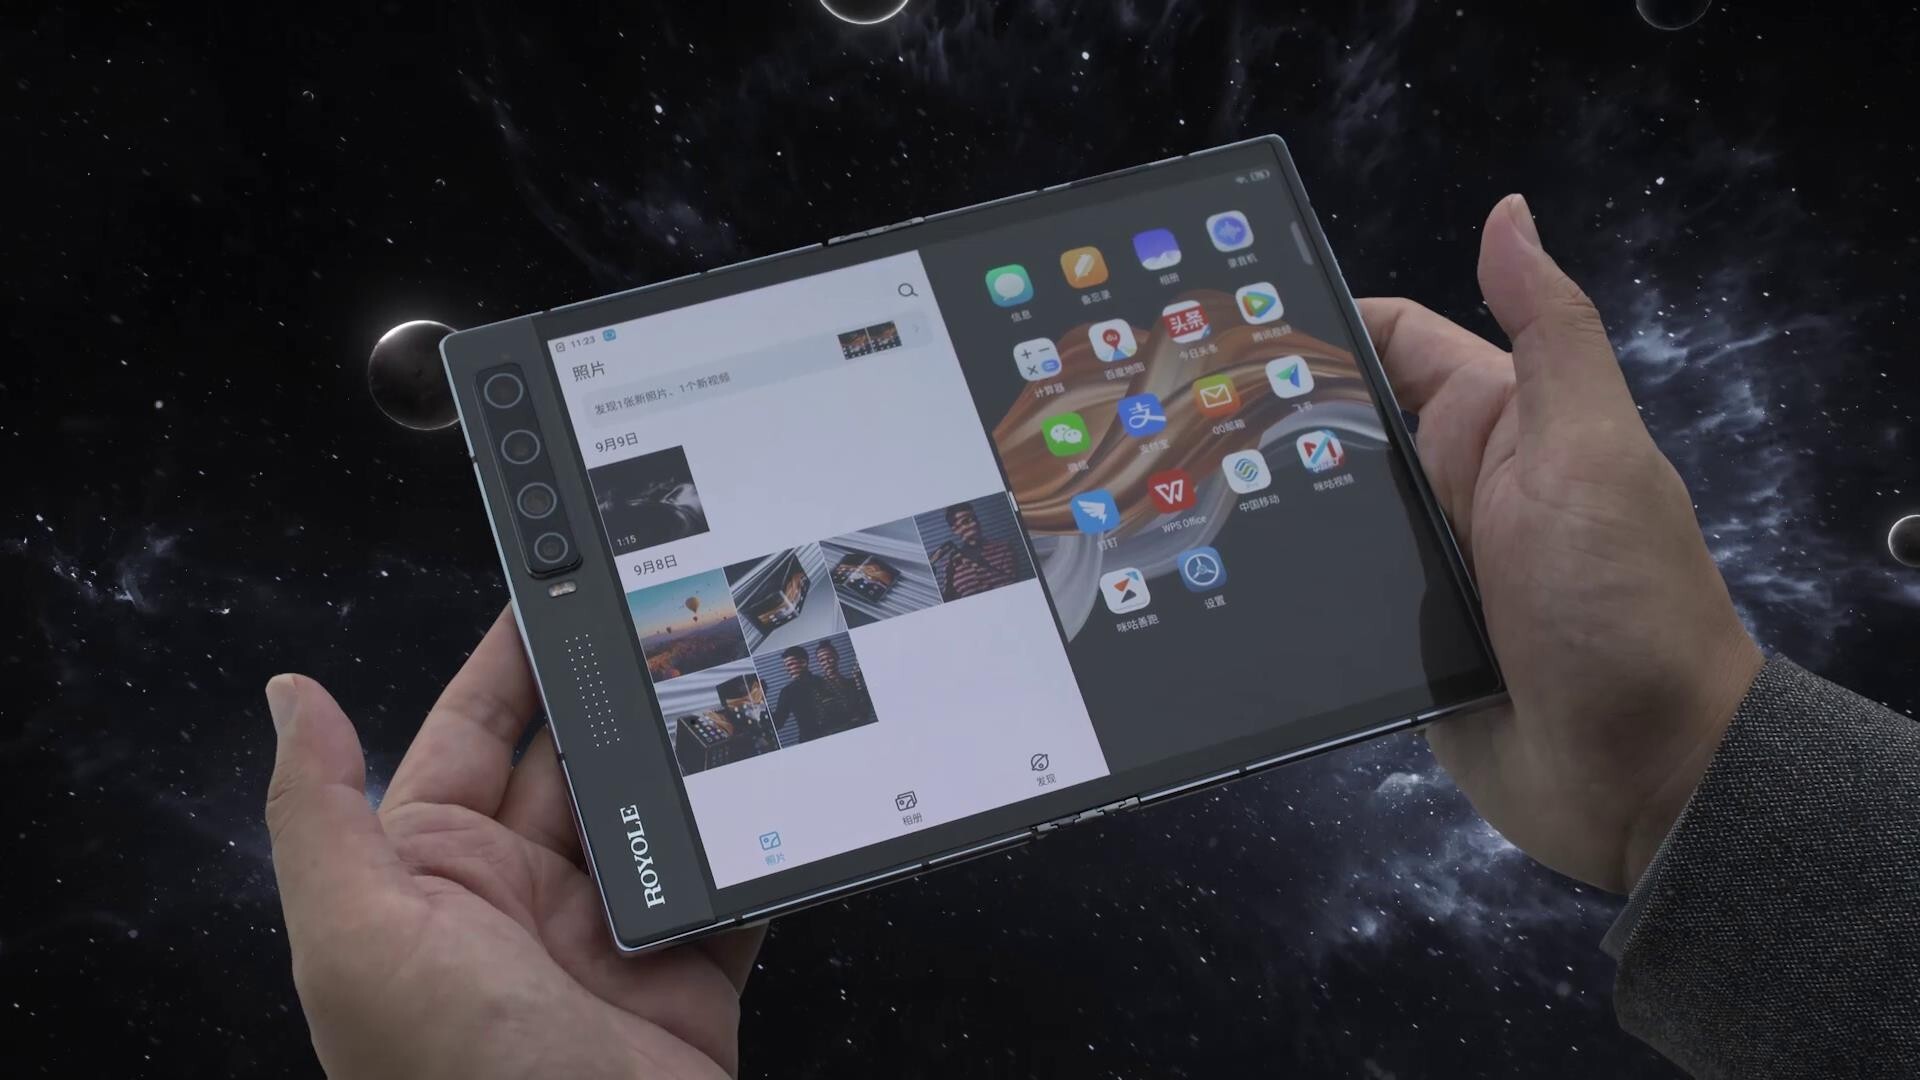 Royole boasts better screen performance on the FlexPai 2 over the first foldable phone it unveiled back in 2018. Picture: Royole